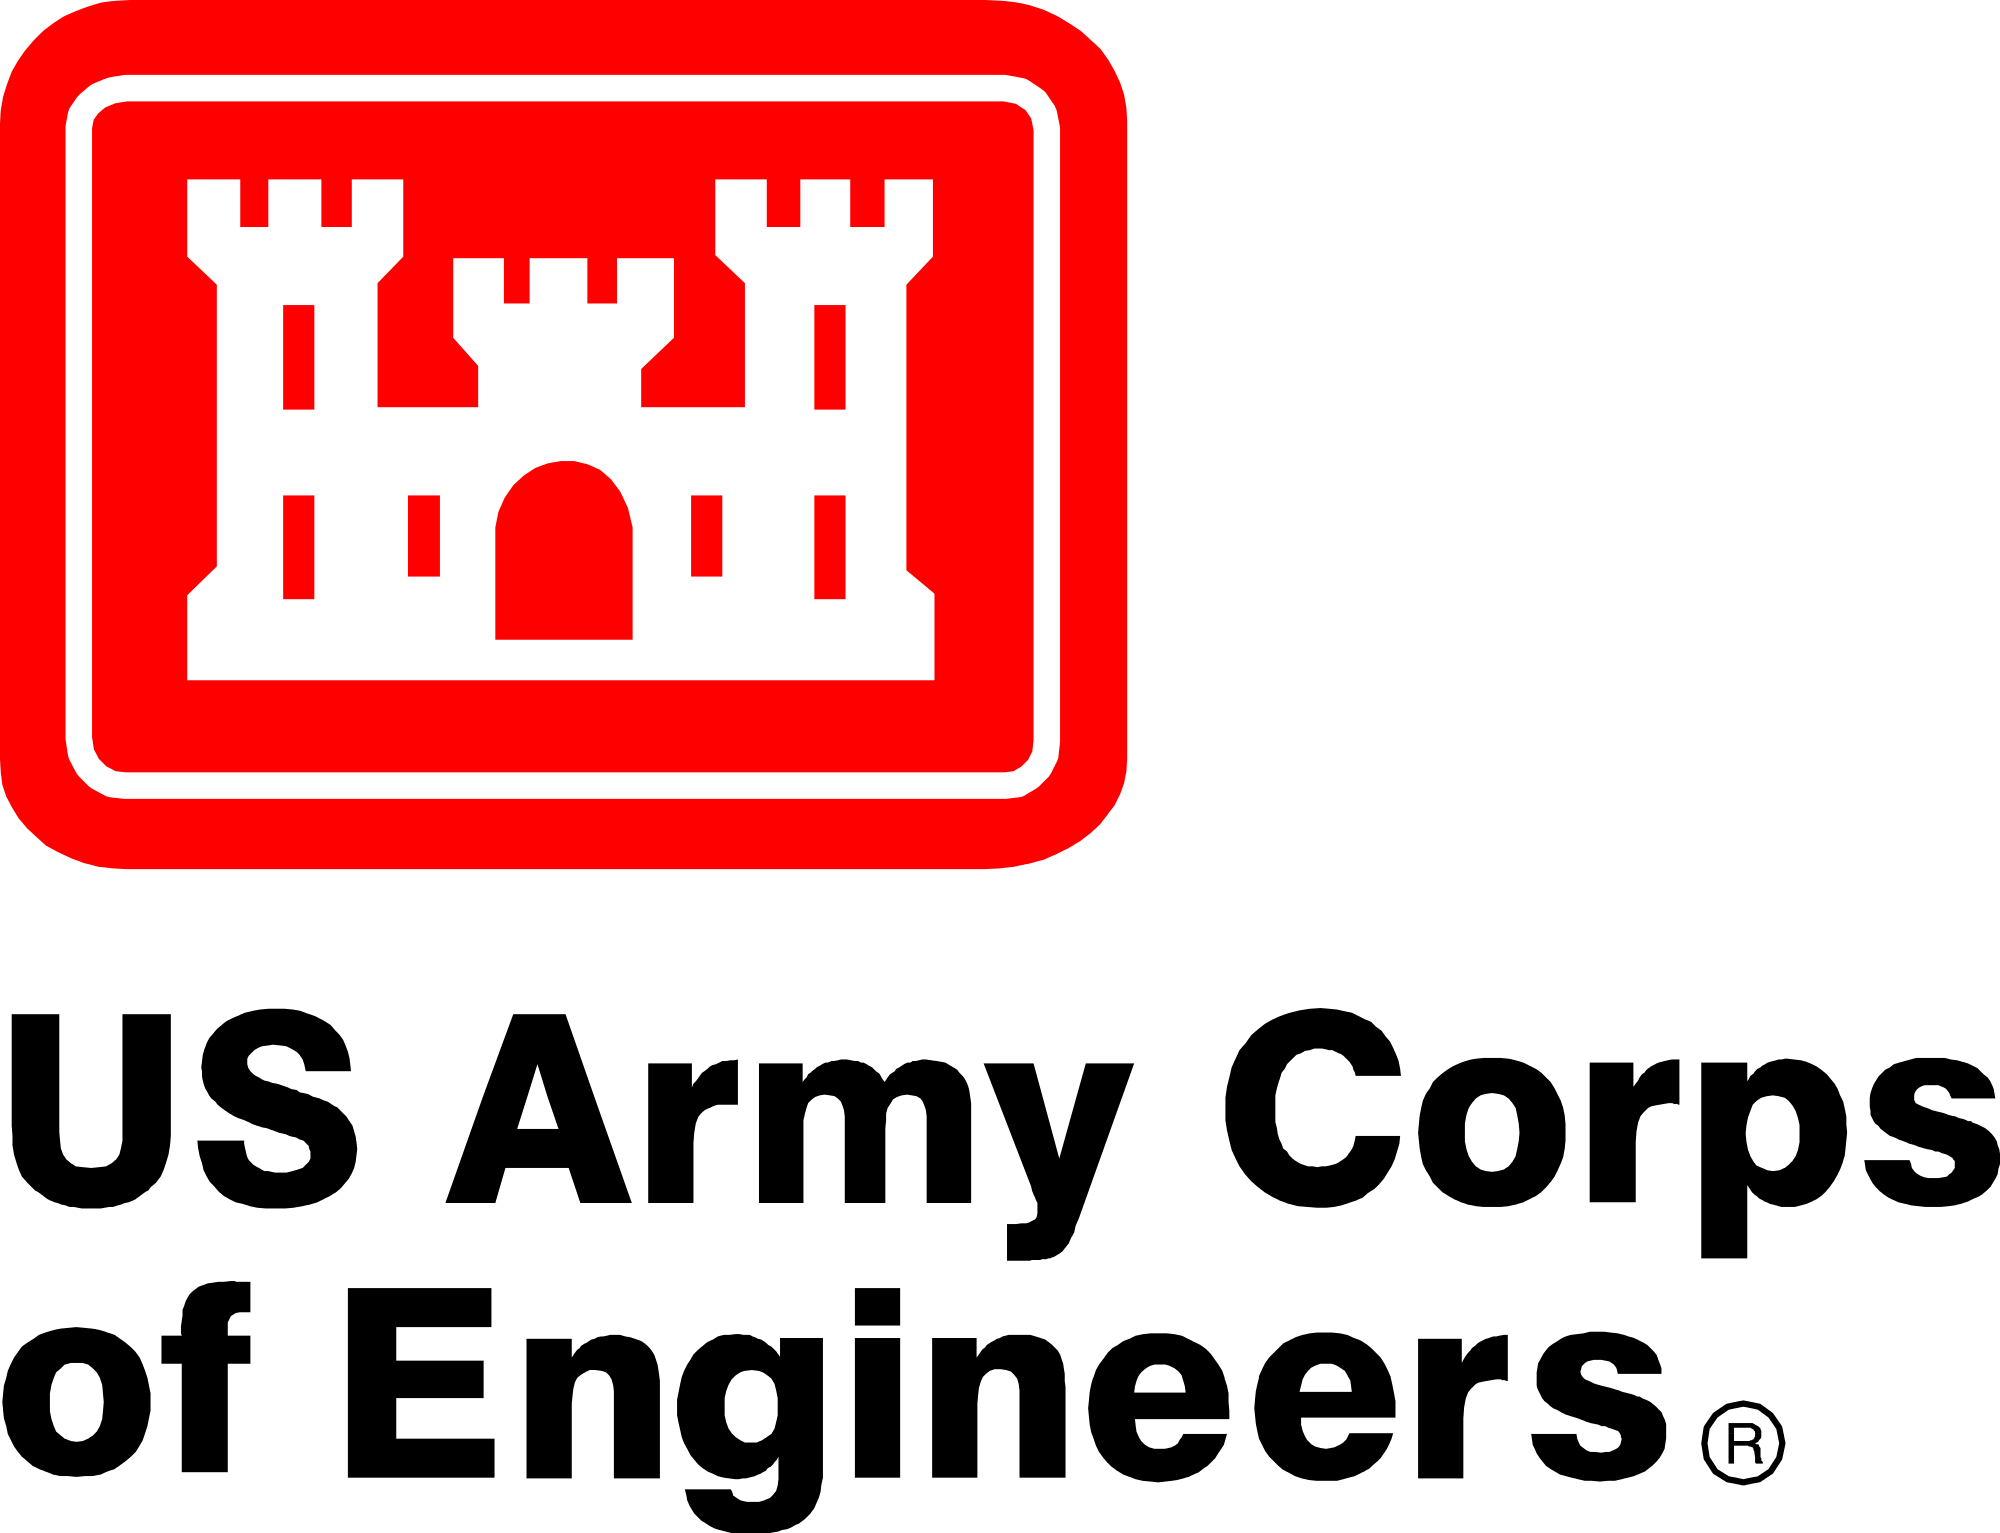 The Corps Logo - File:US-ArmyCorpsOfEngineers-Logo.svg - Wikimedia Commons